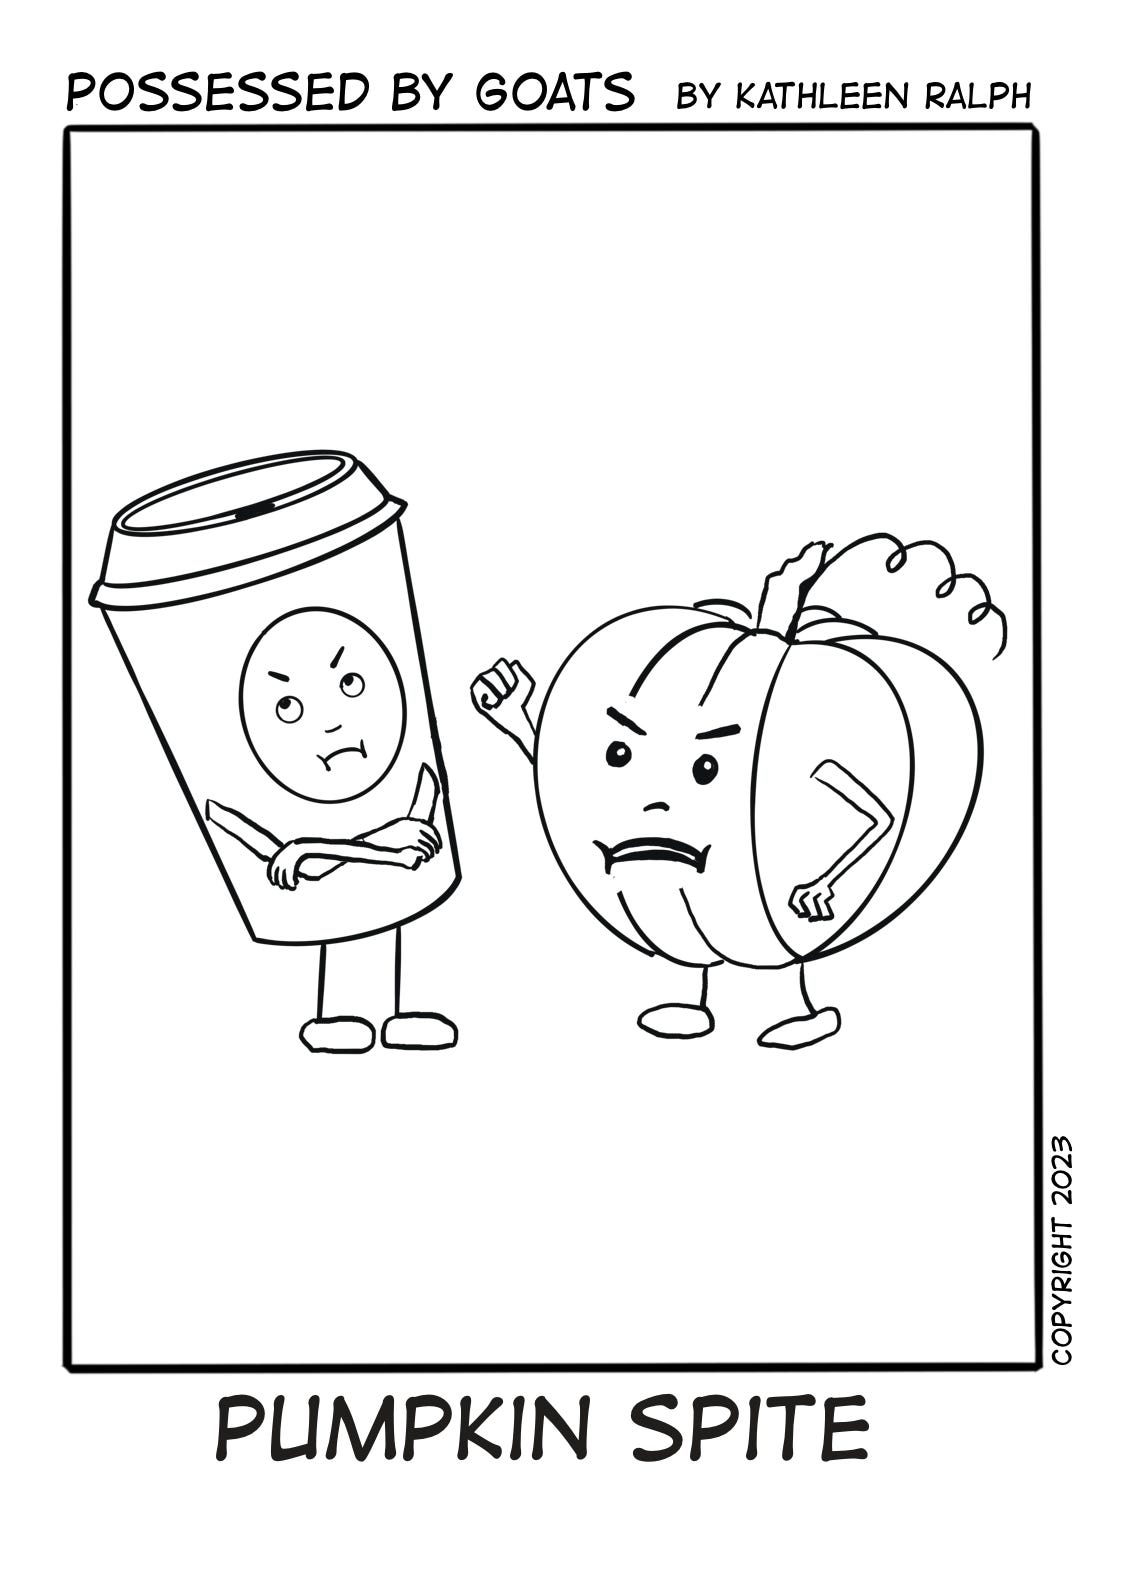 Comic; pumpkin shaking it’s fist at a coffee cup.  The coffee cup has it’s arms crossed and is rolling it’s eyes